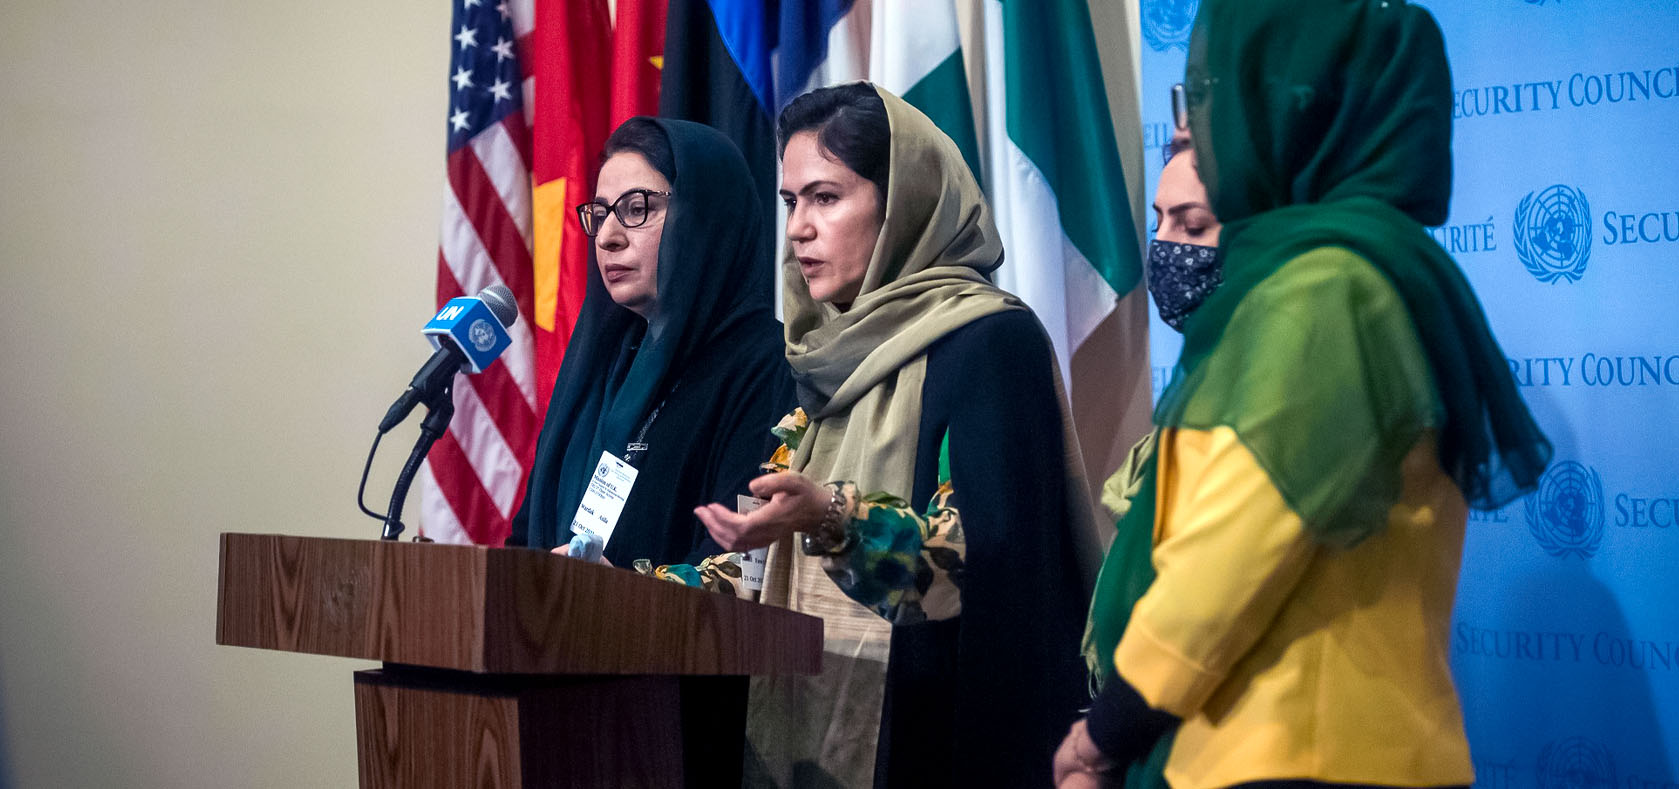 4 Afghan females are standing and speaking at the podium